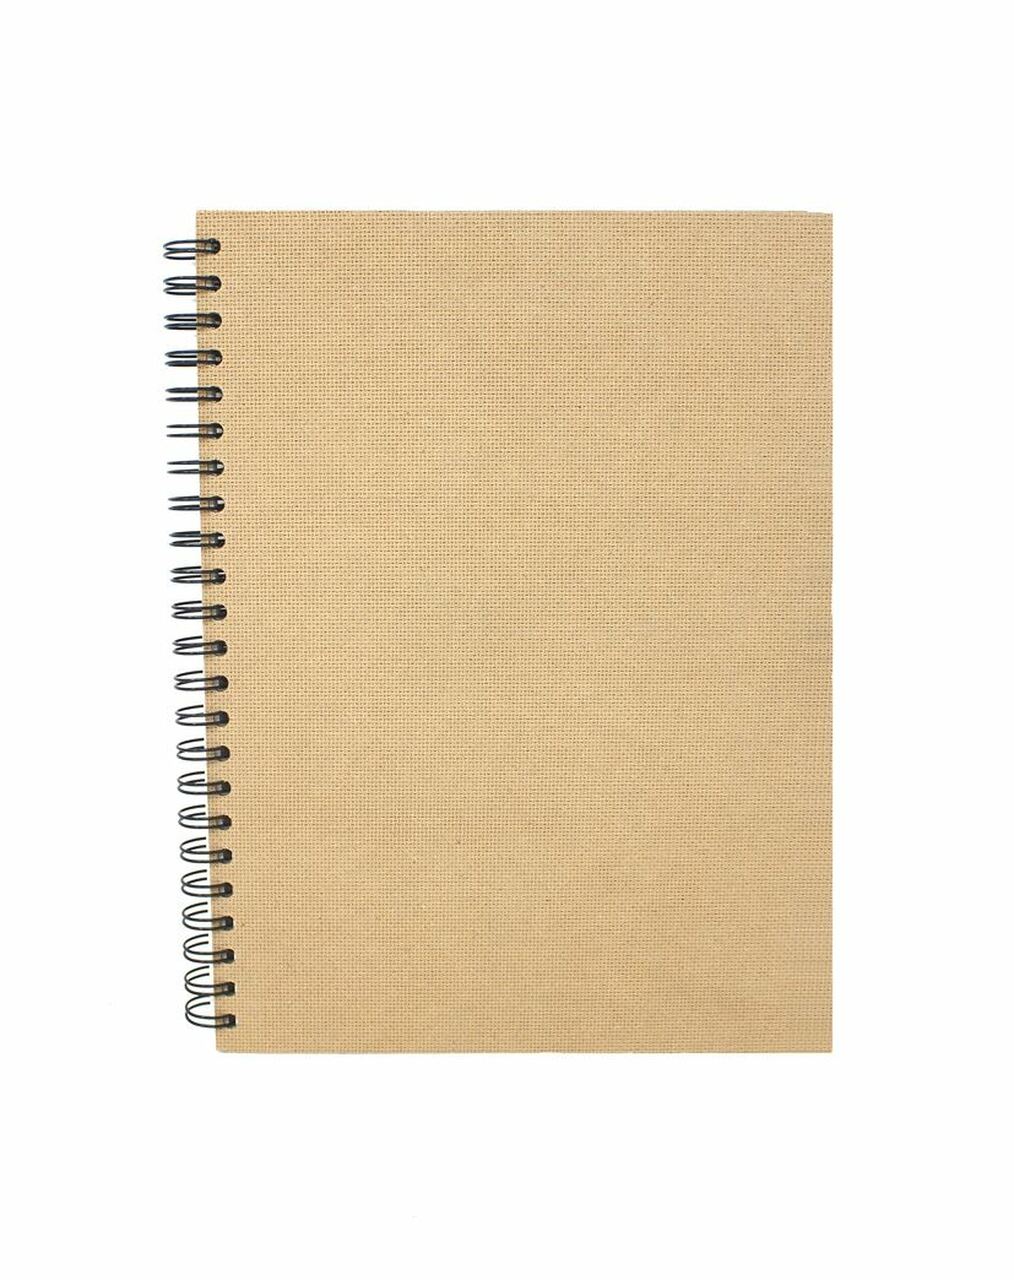 Enviro Spiral Bound Recycled Sketchbooks - 170gsm - The Fine Art Warehouse